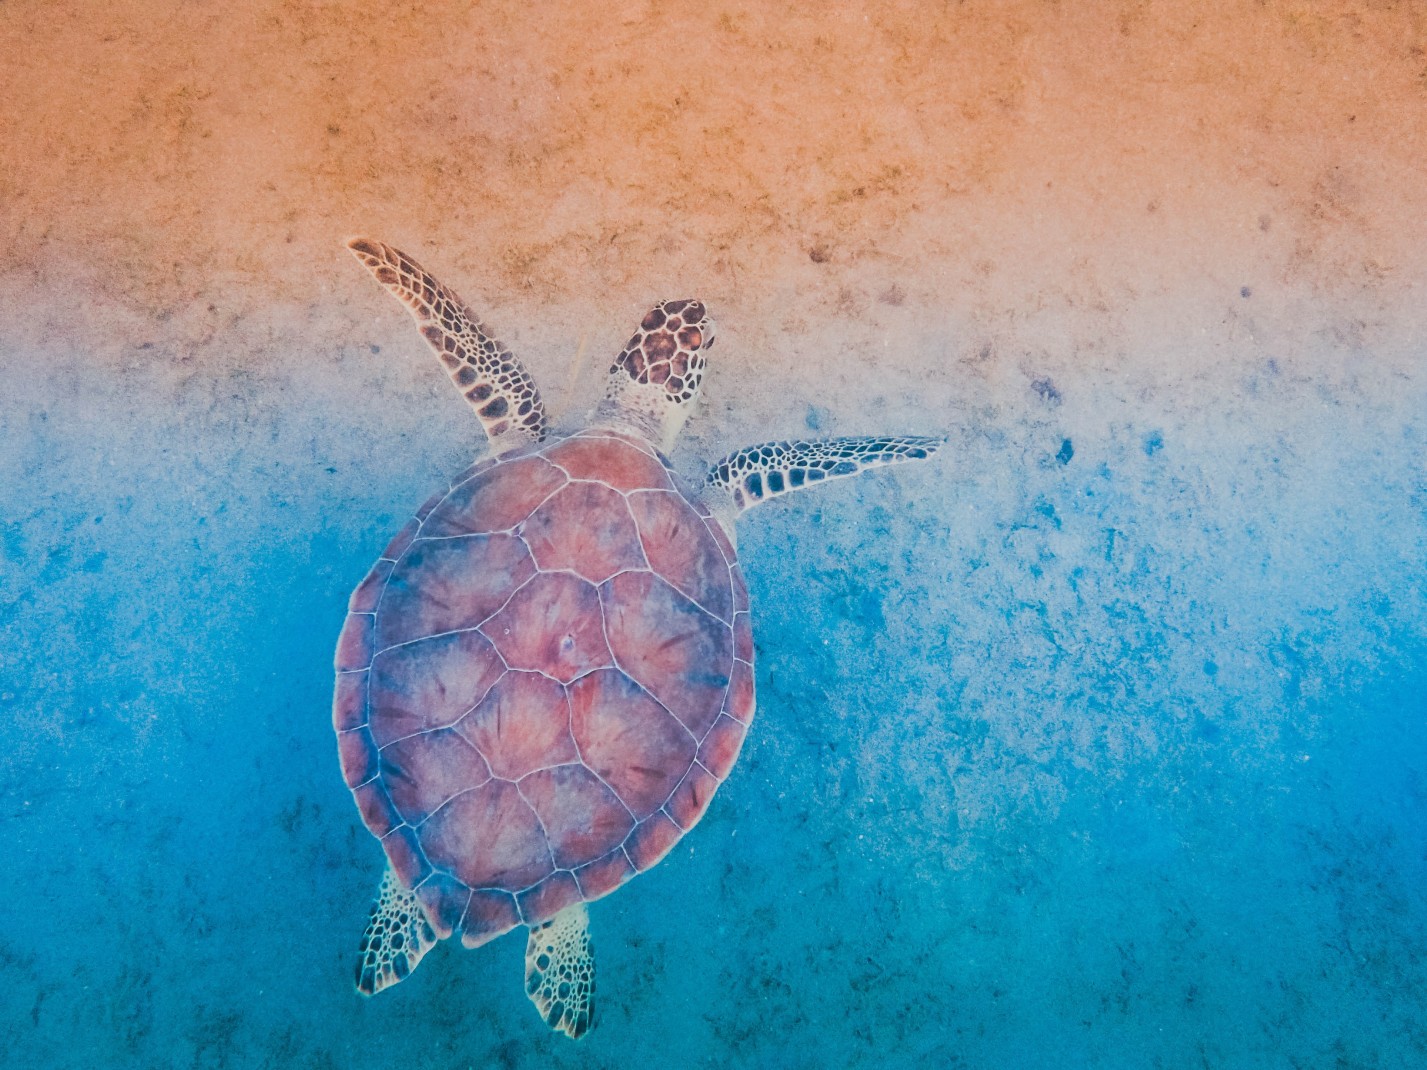 Turtle with red shell swims in blue waters along red sand beach